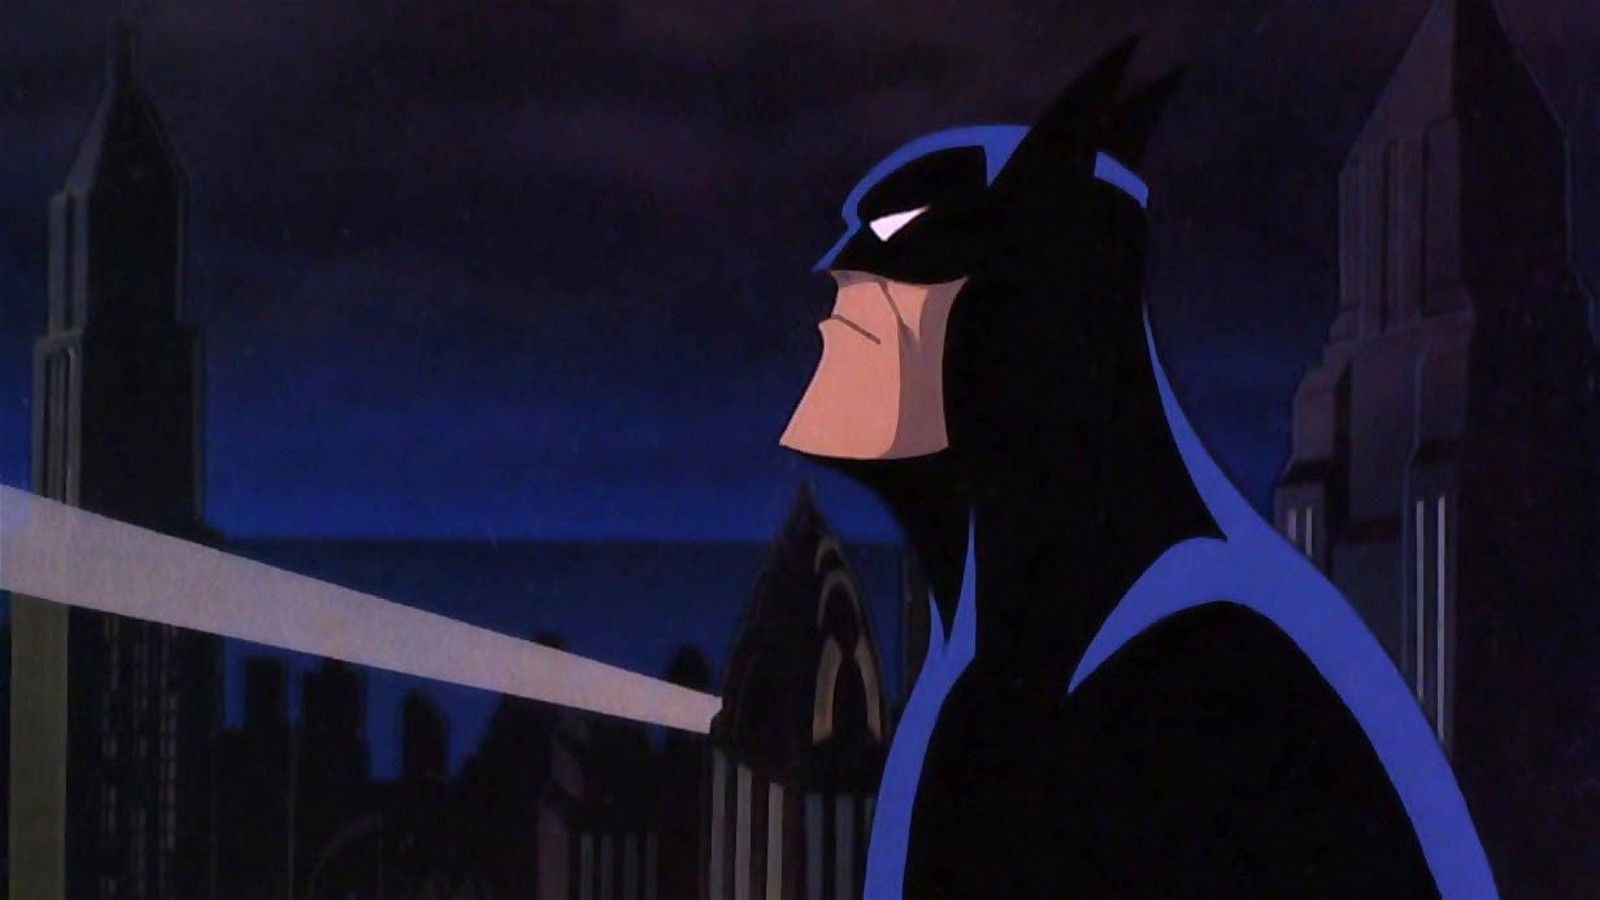 Bruce Timm's favorite episode in Batman: The Animated Series was On Leather Wings